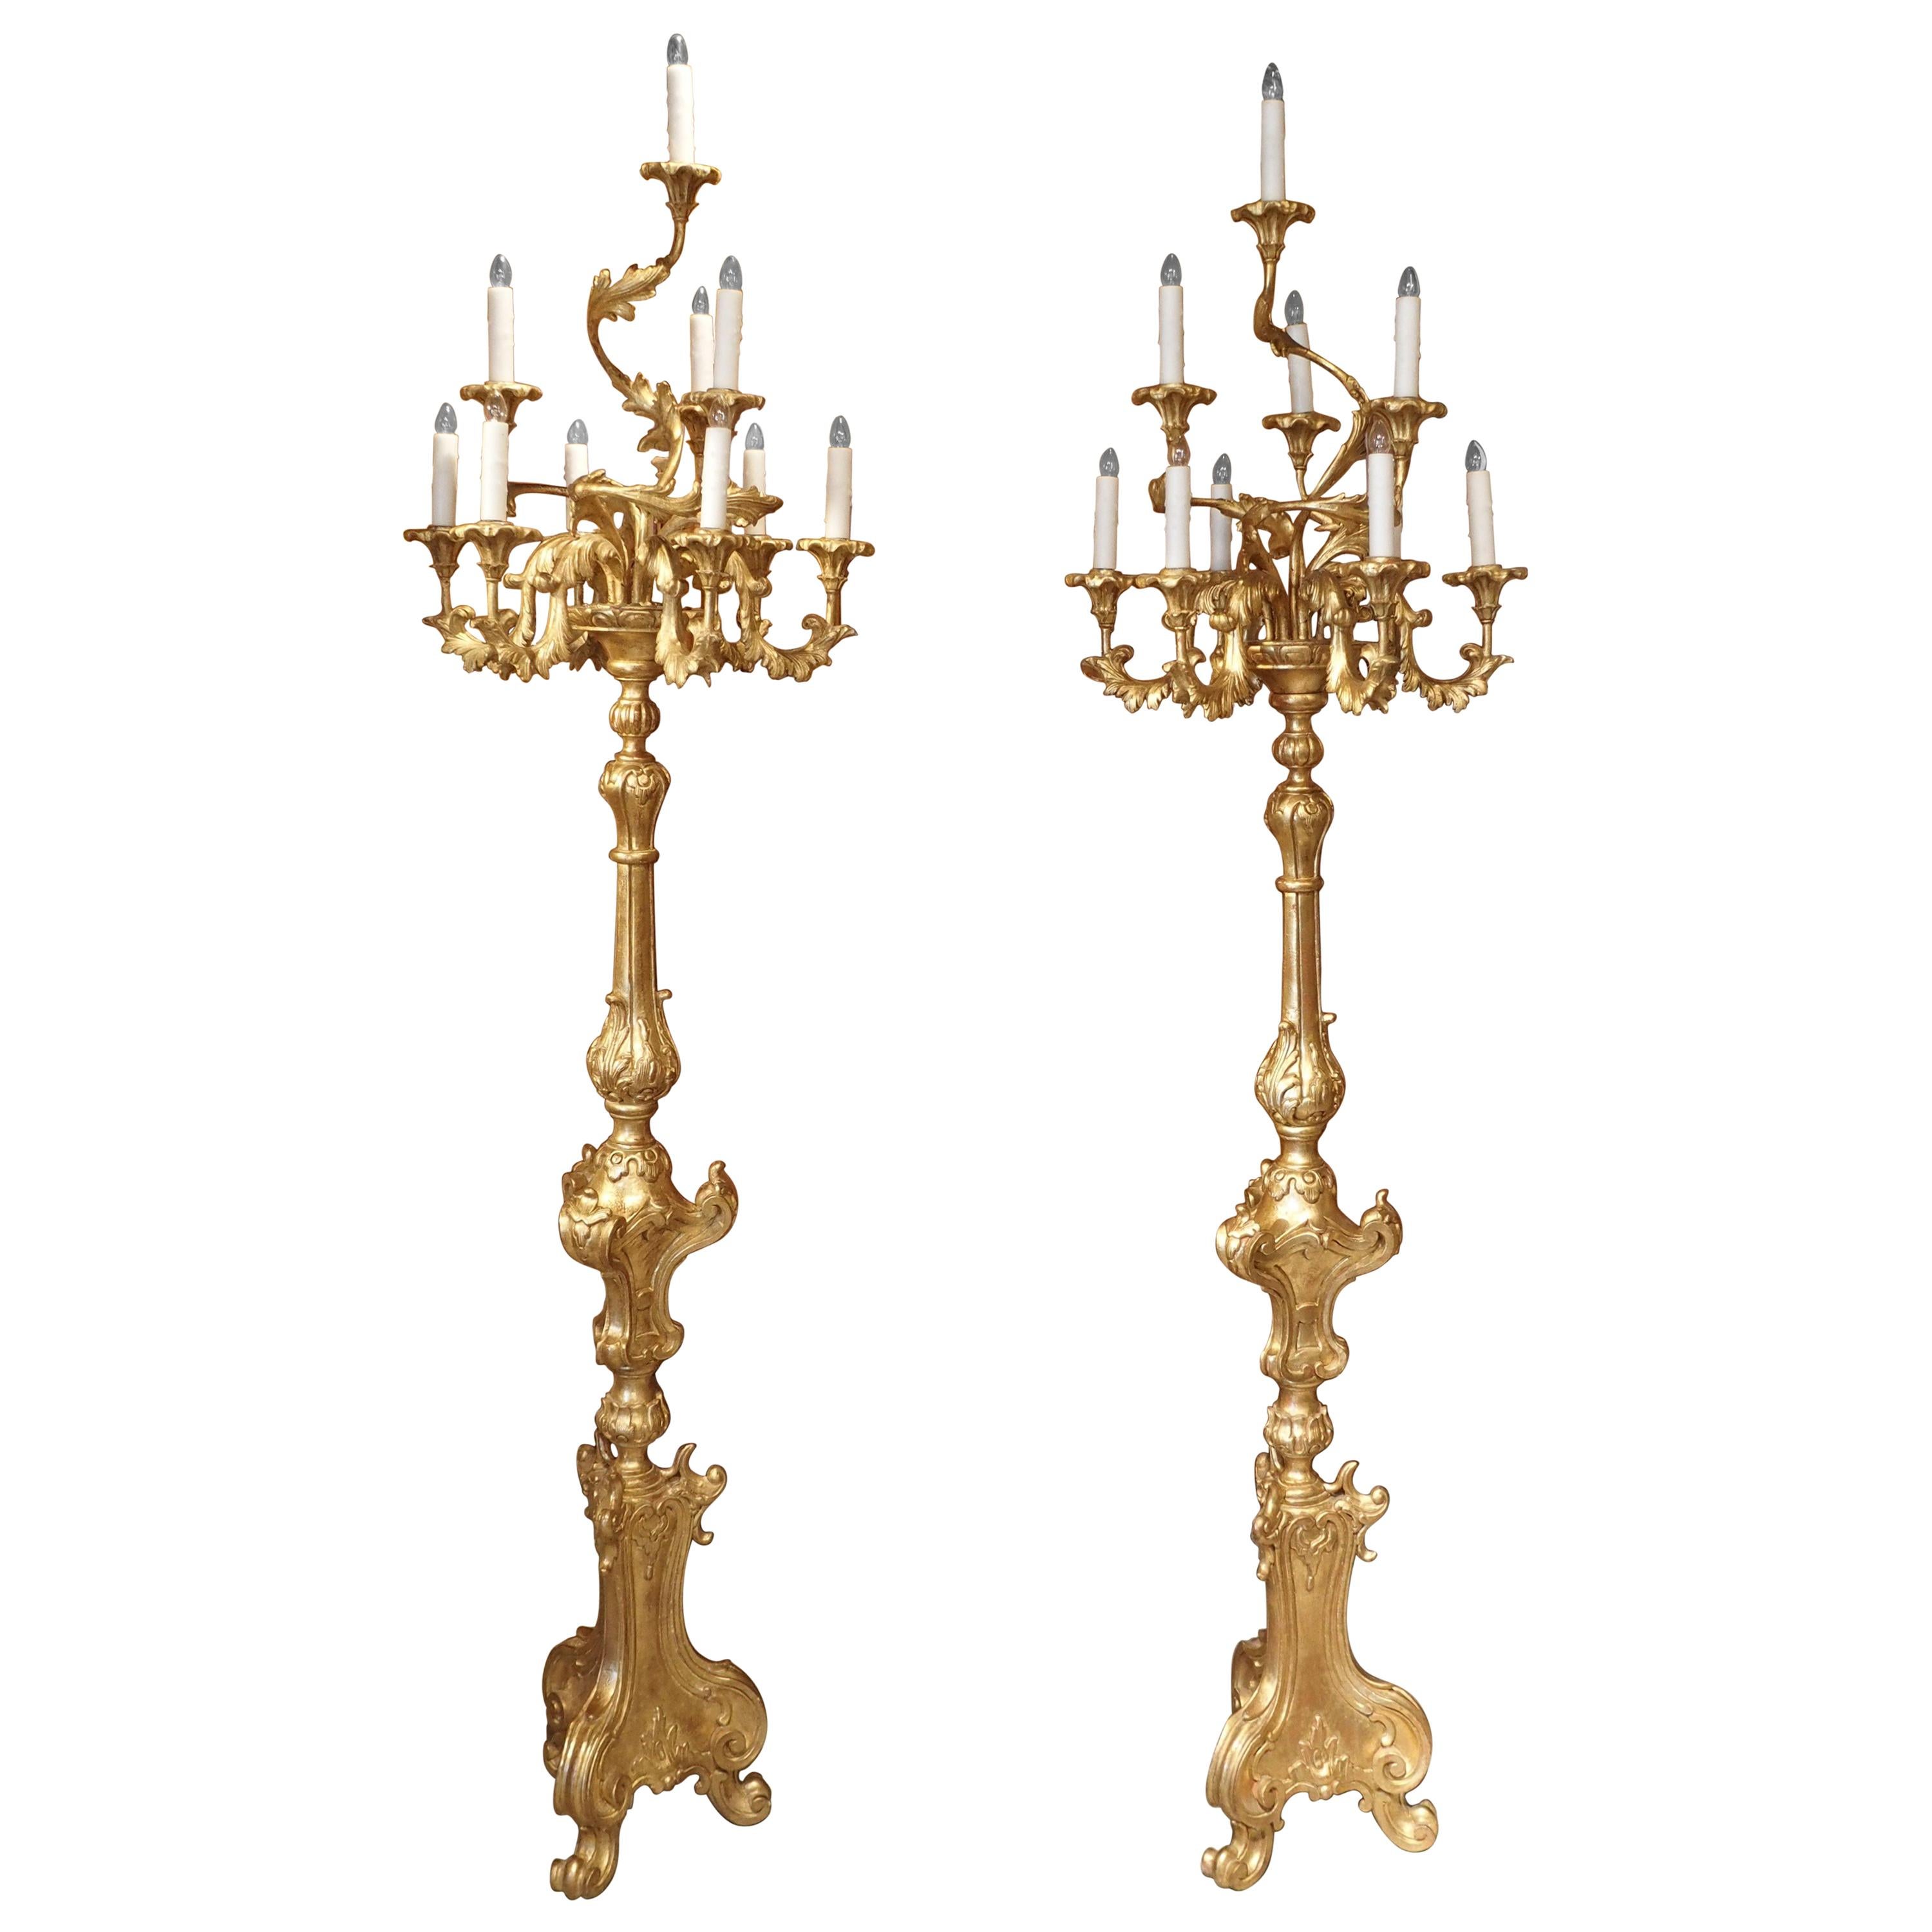 Tall Pair of Louis XV Style Giltwood Torcheres from Italy